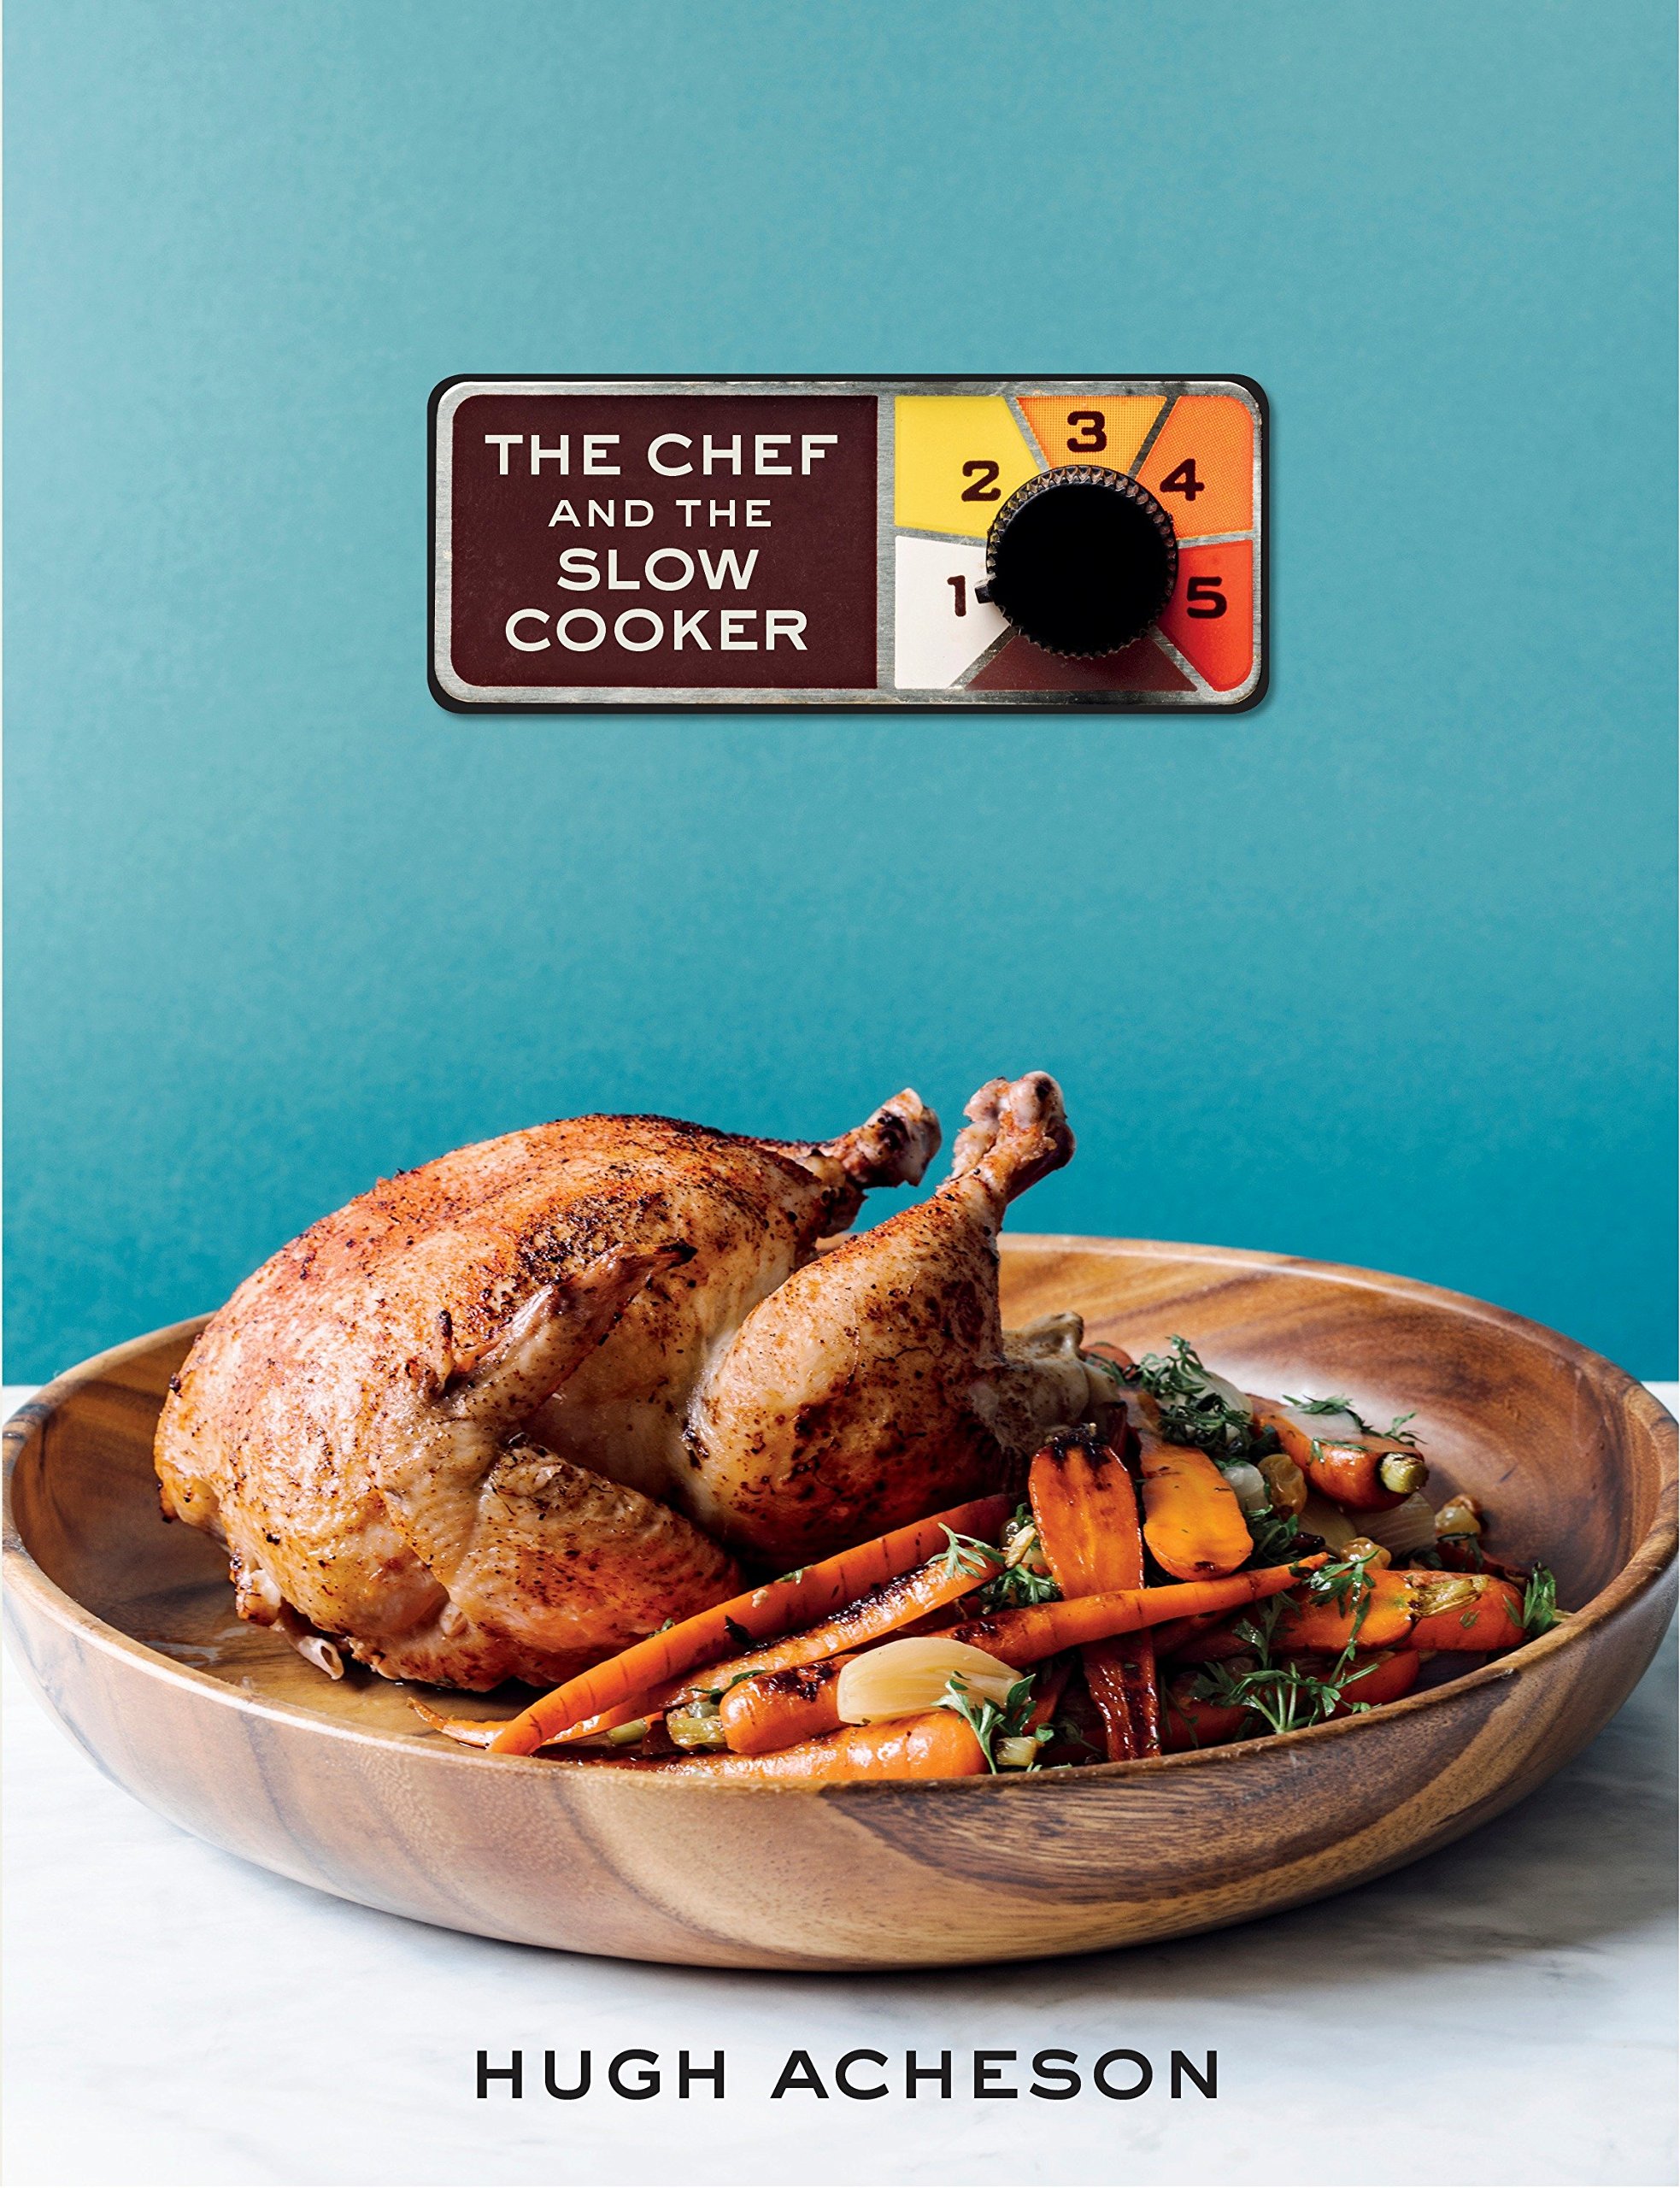 The Chef and the Slow Cooker book cover